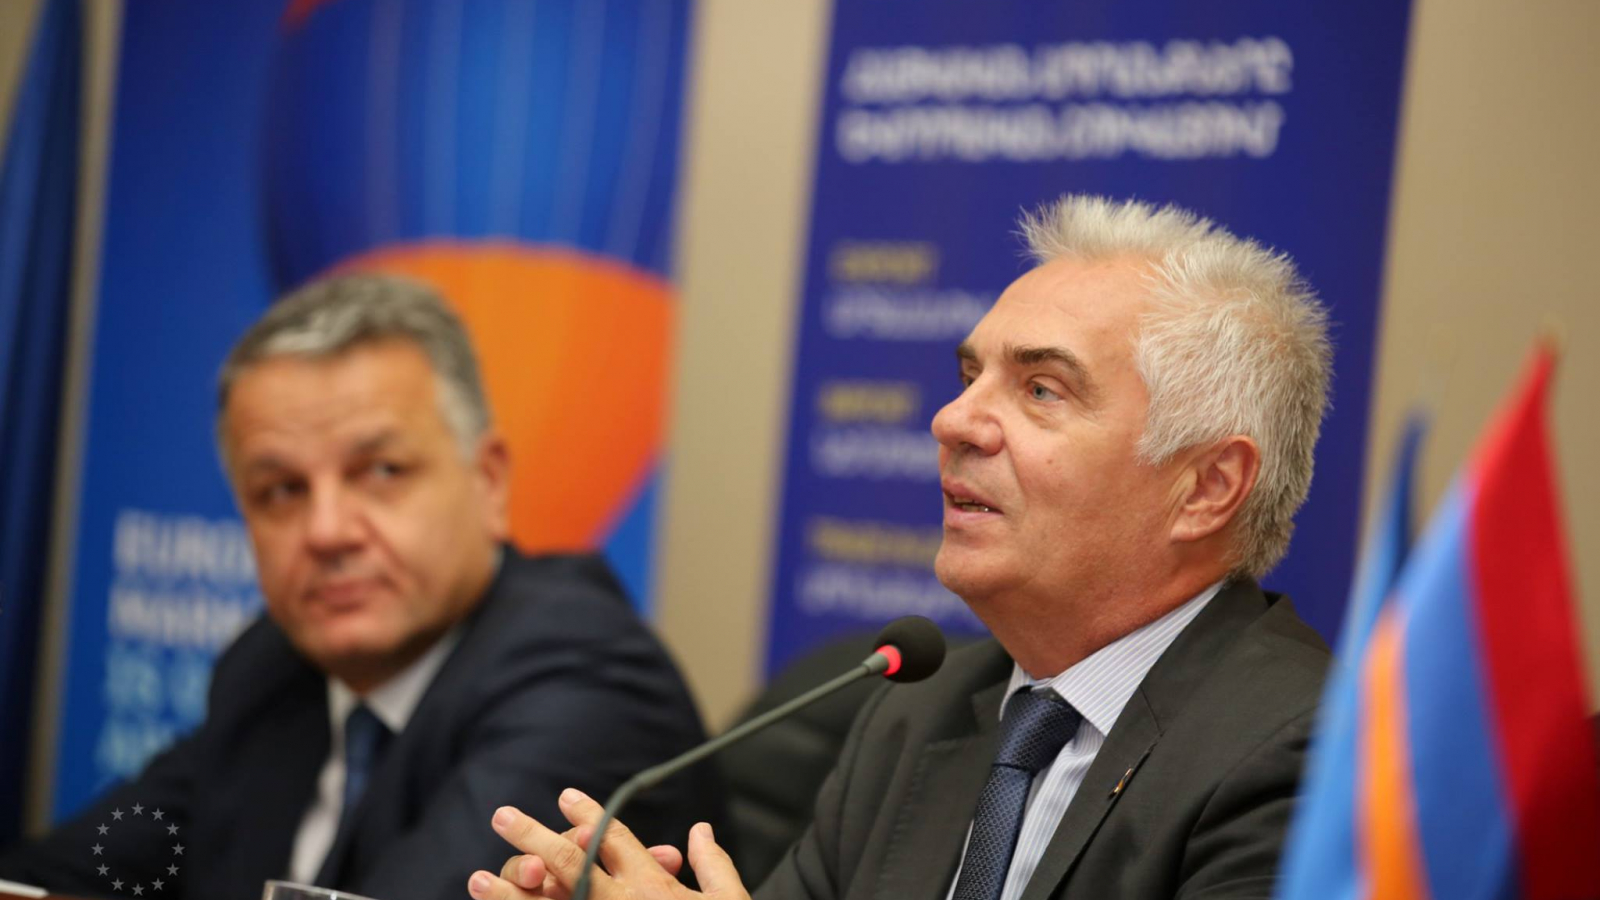 EU and Armenia discussed mutual business opportunities at event in Yerevan